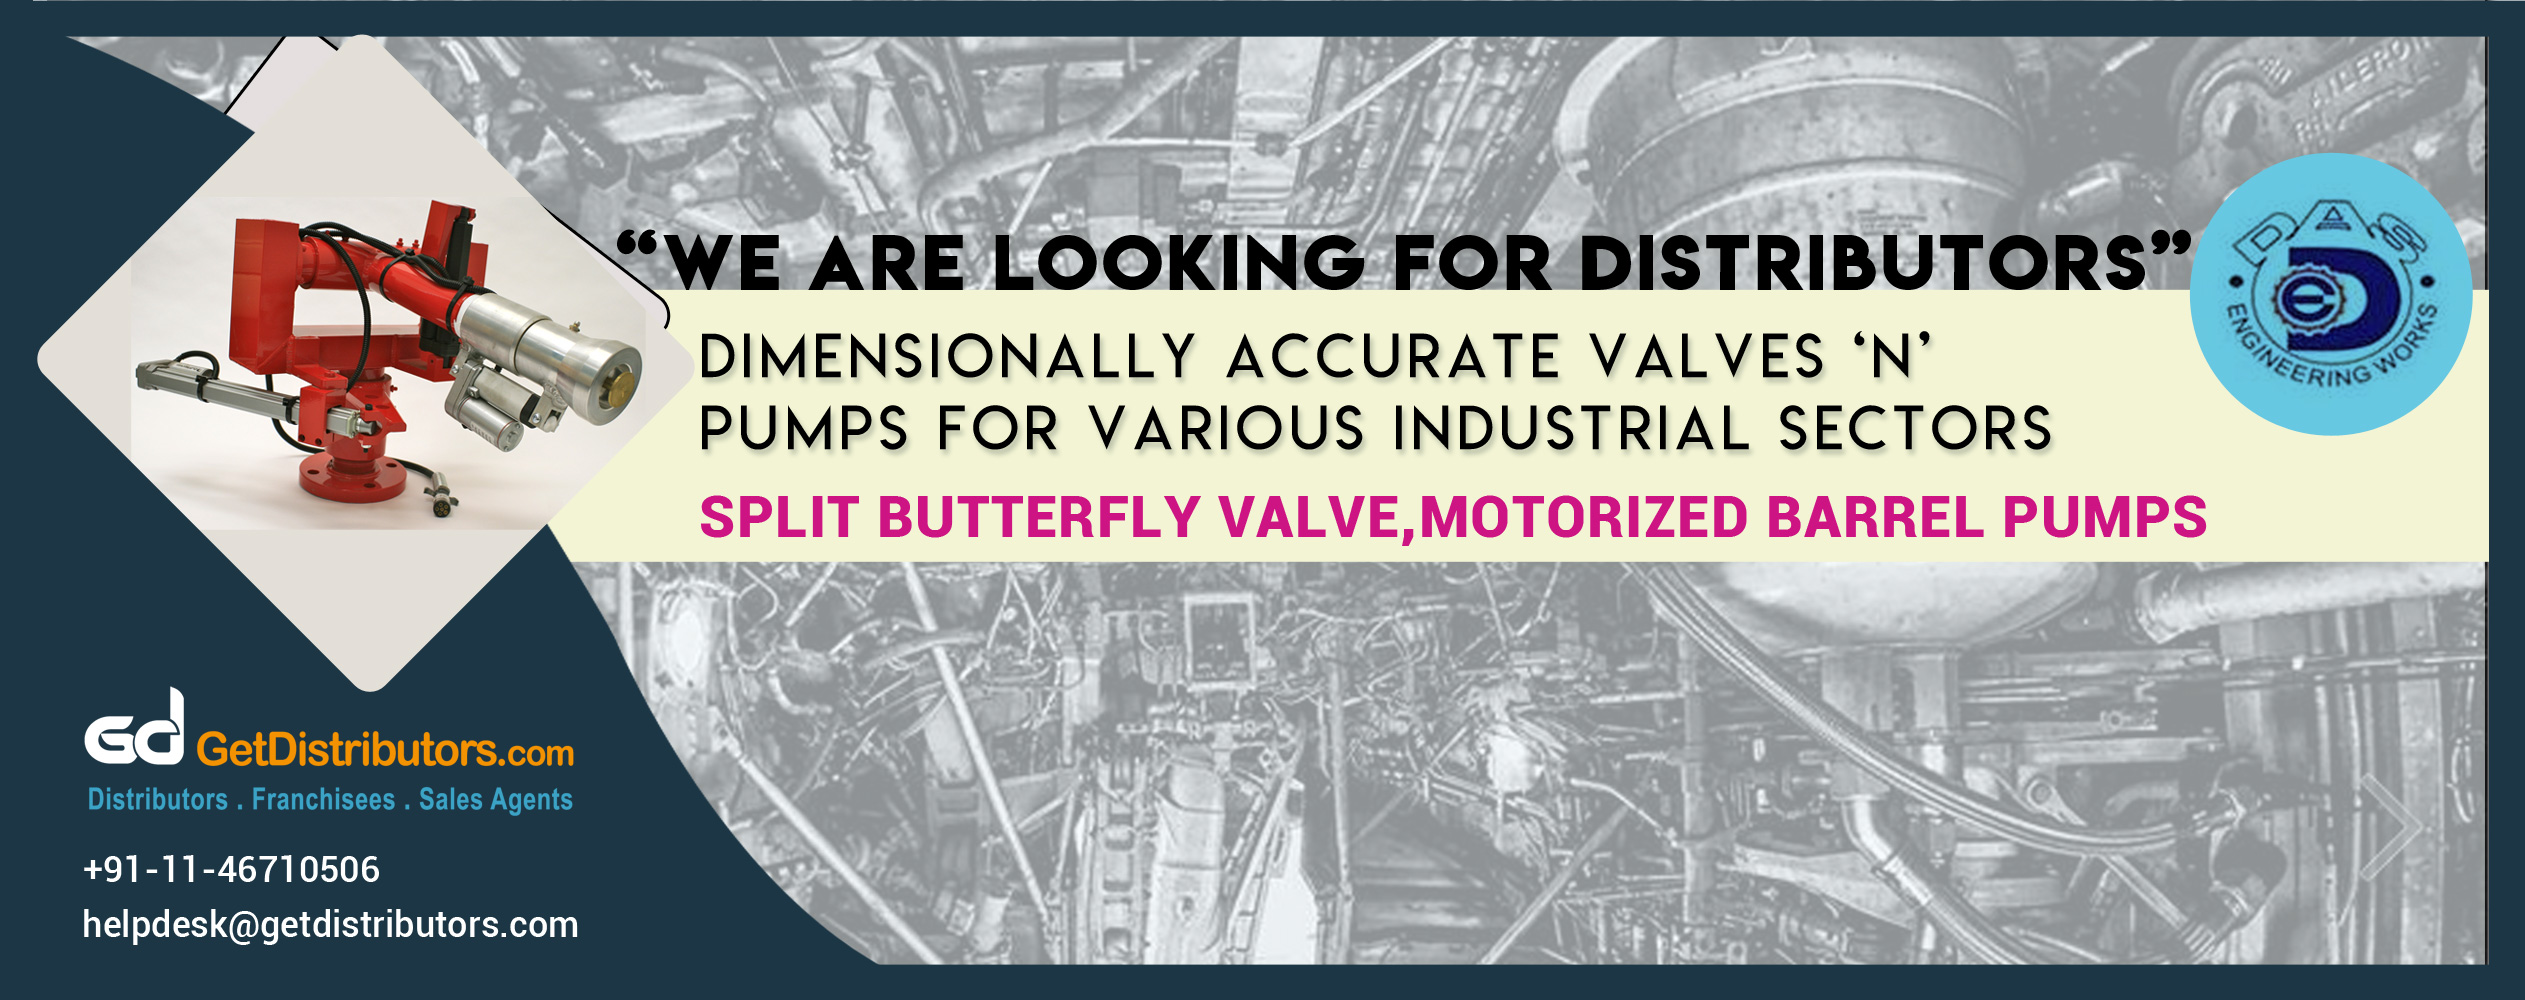 Dimensionally Accurate Valves & Pumps for Various Industrial Sectors